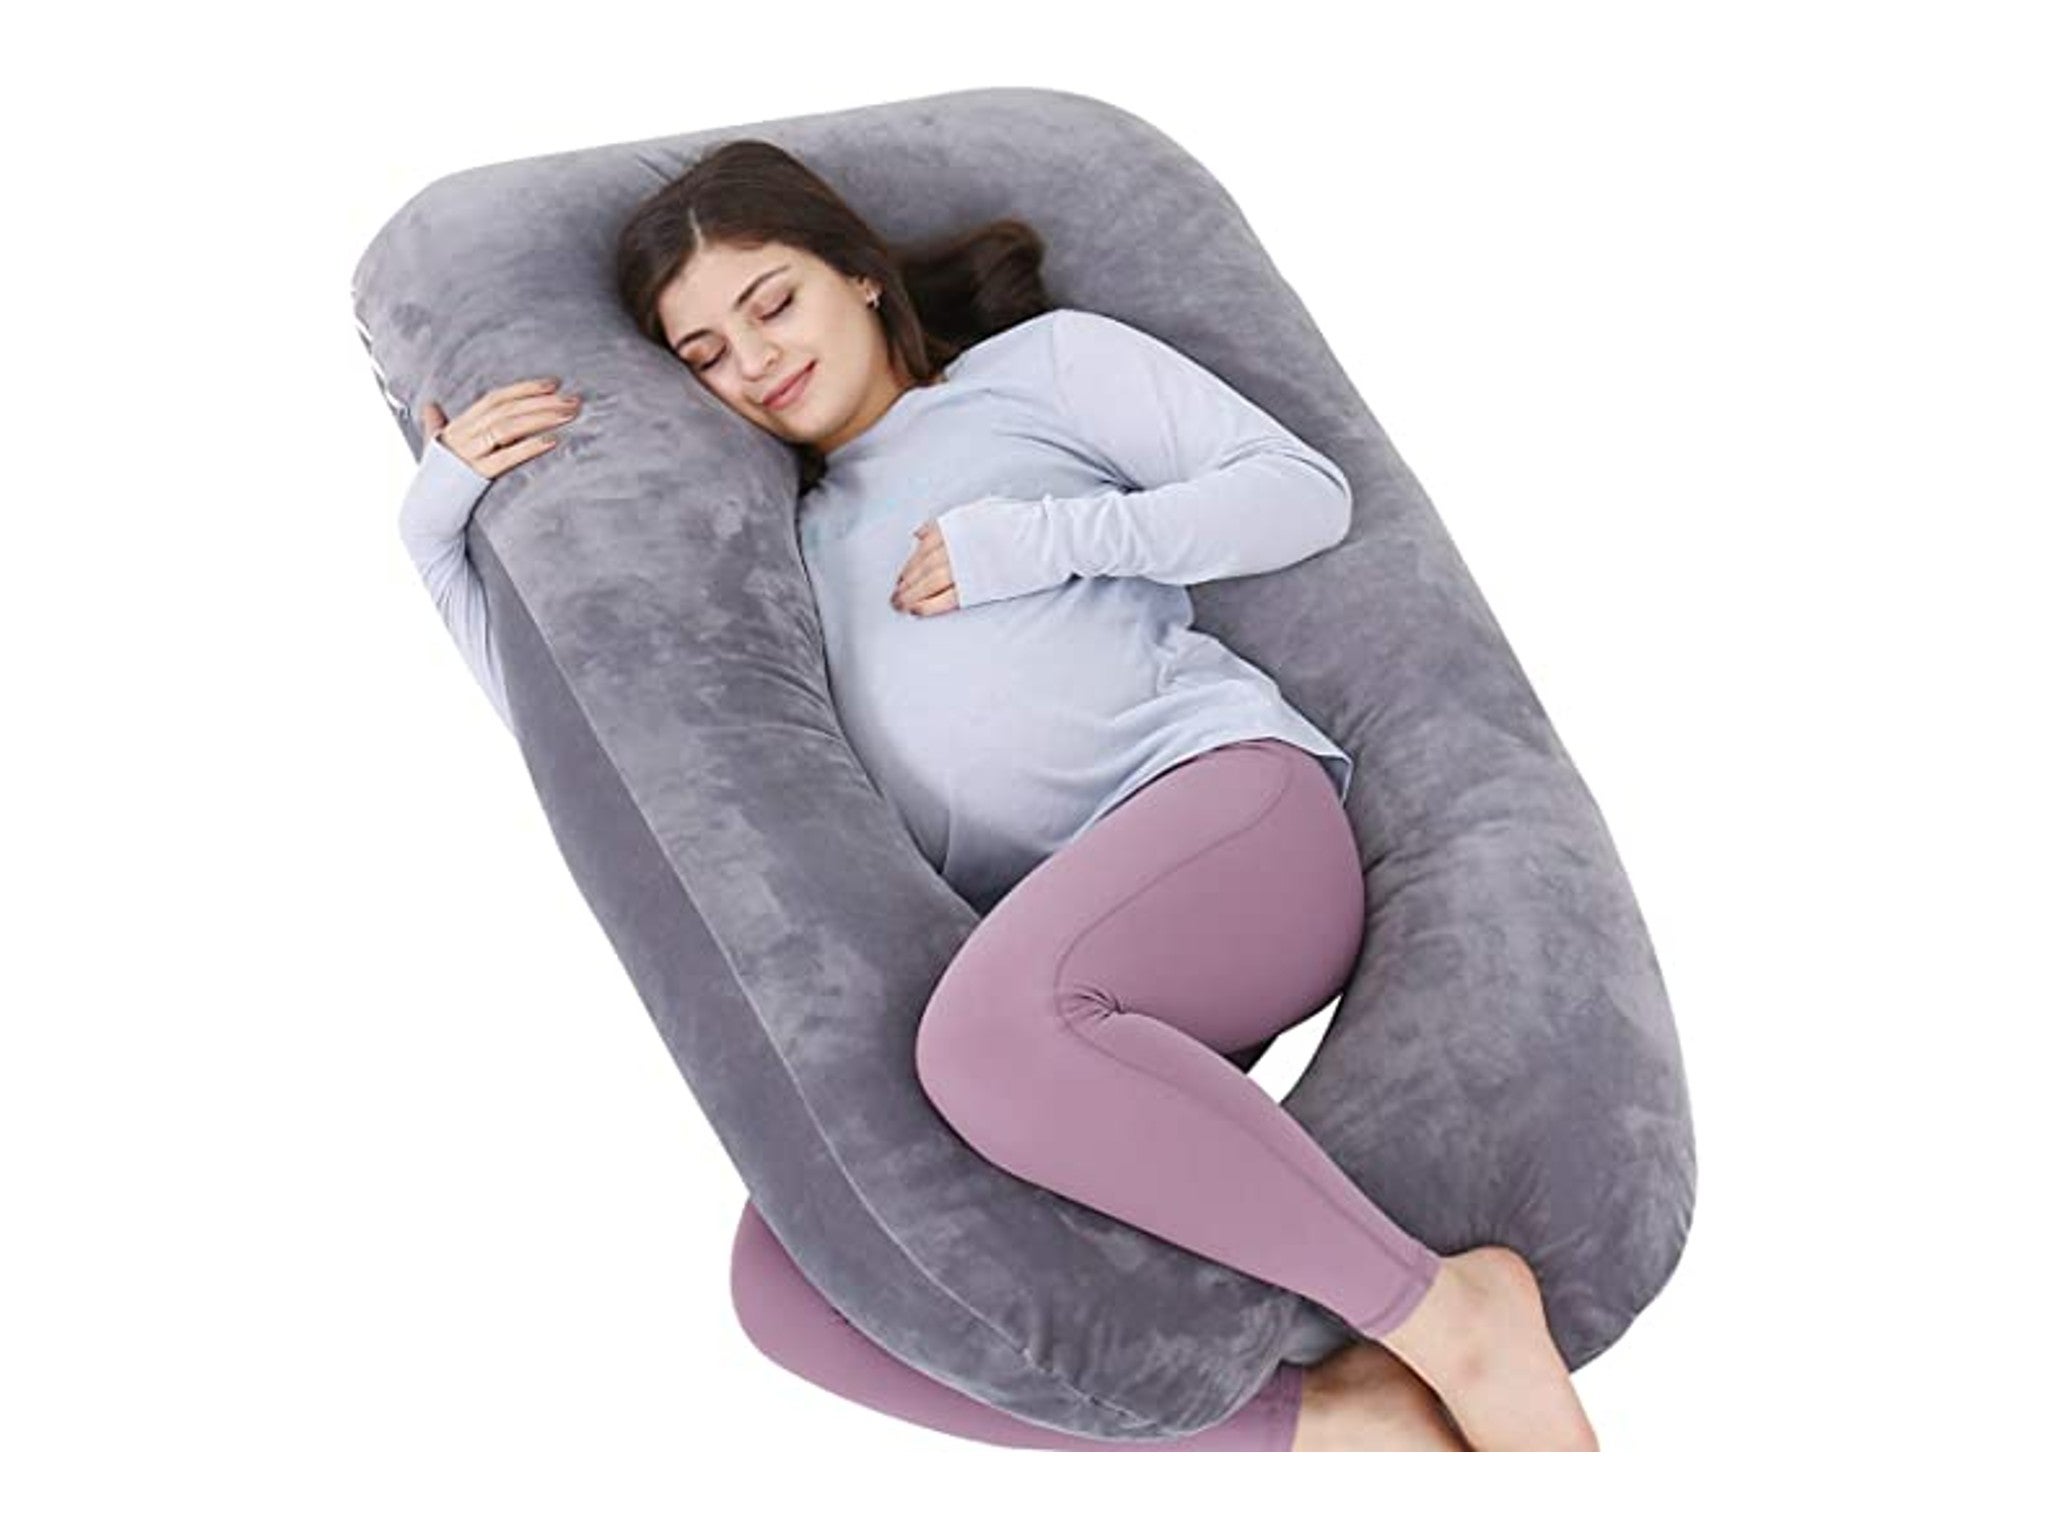 Baby Bub Maternity Pillow Washable Zippered- Retail Price: $75